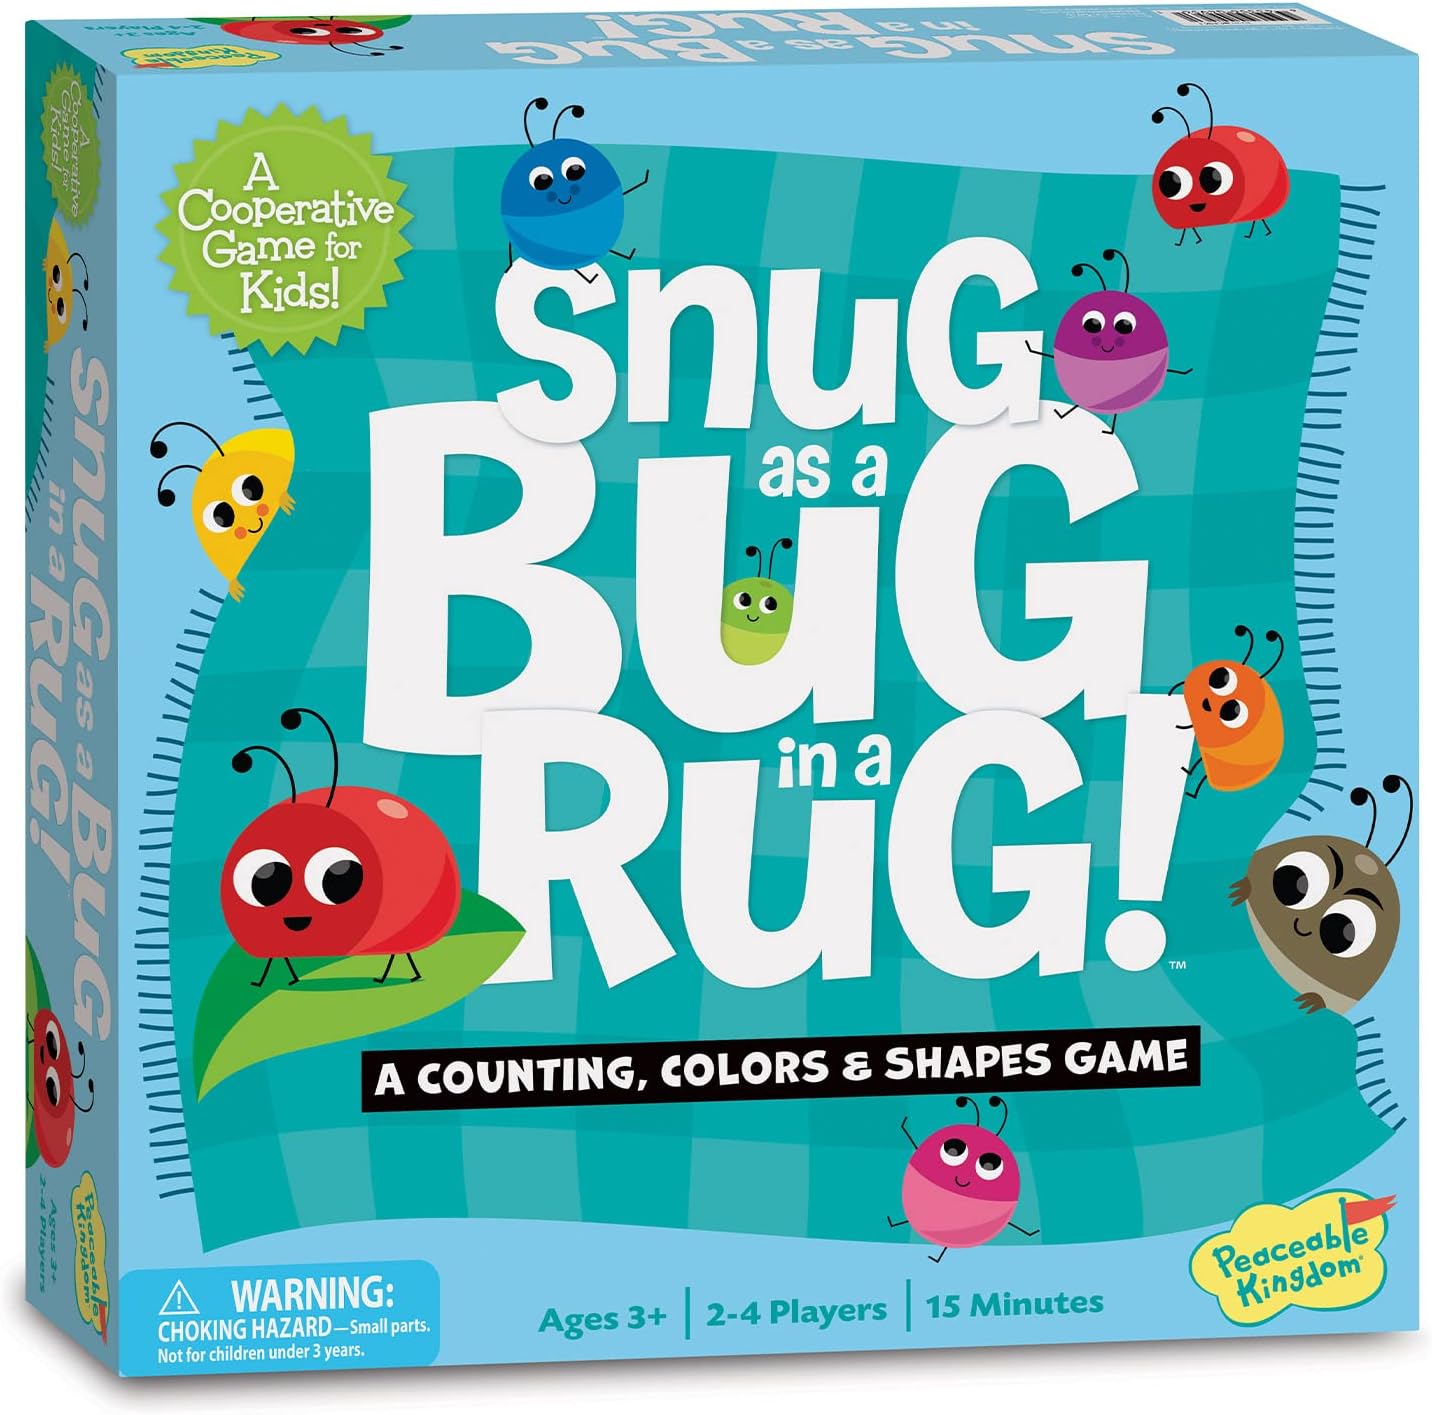 A Counting, Colors, & Shapes Game